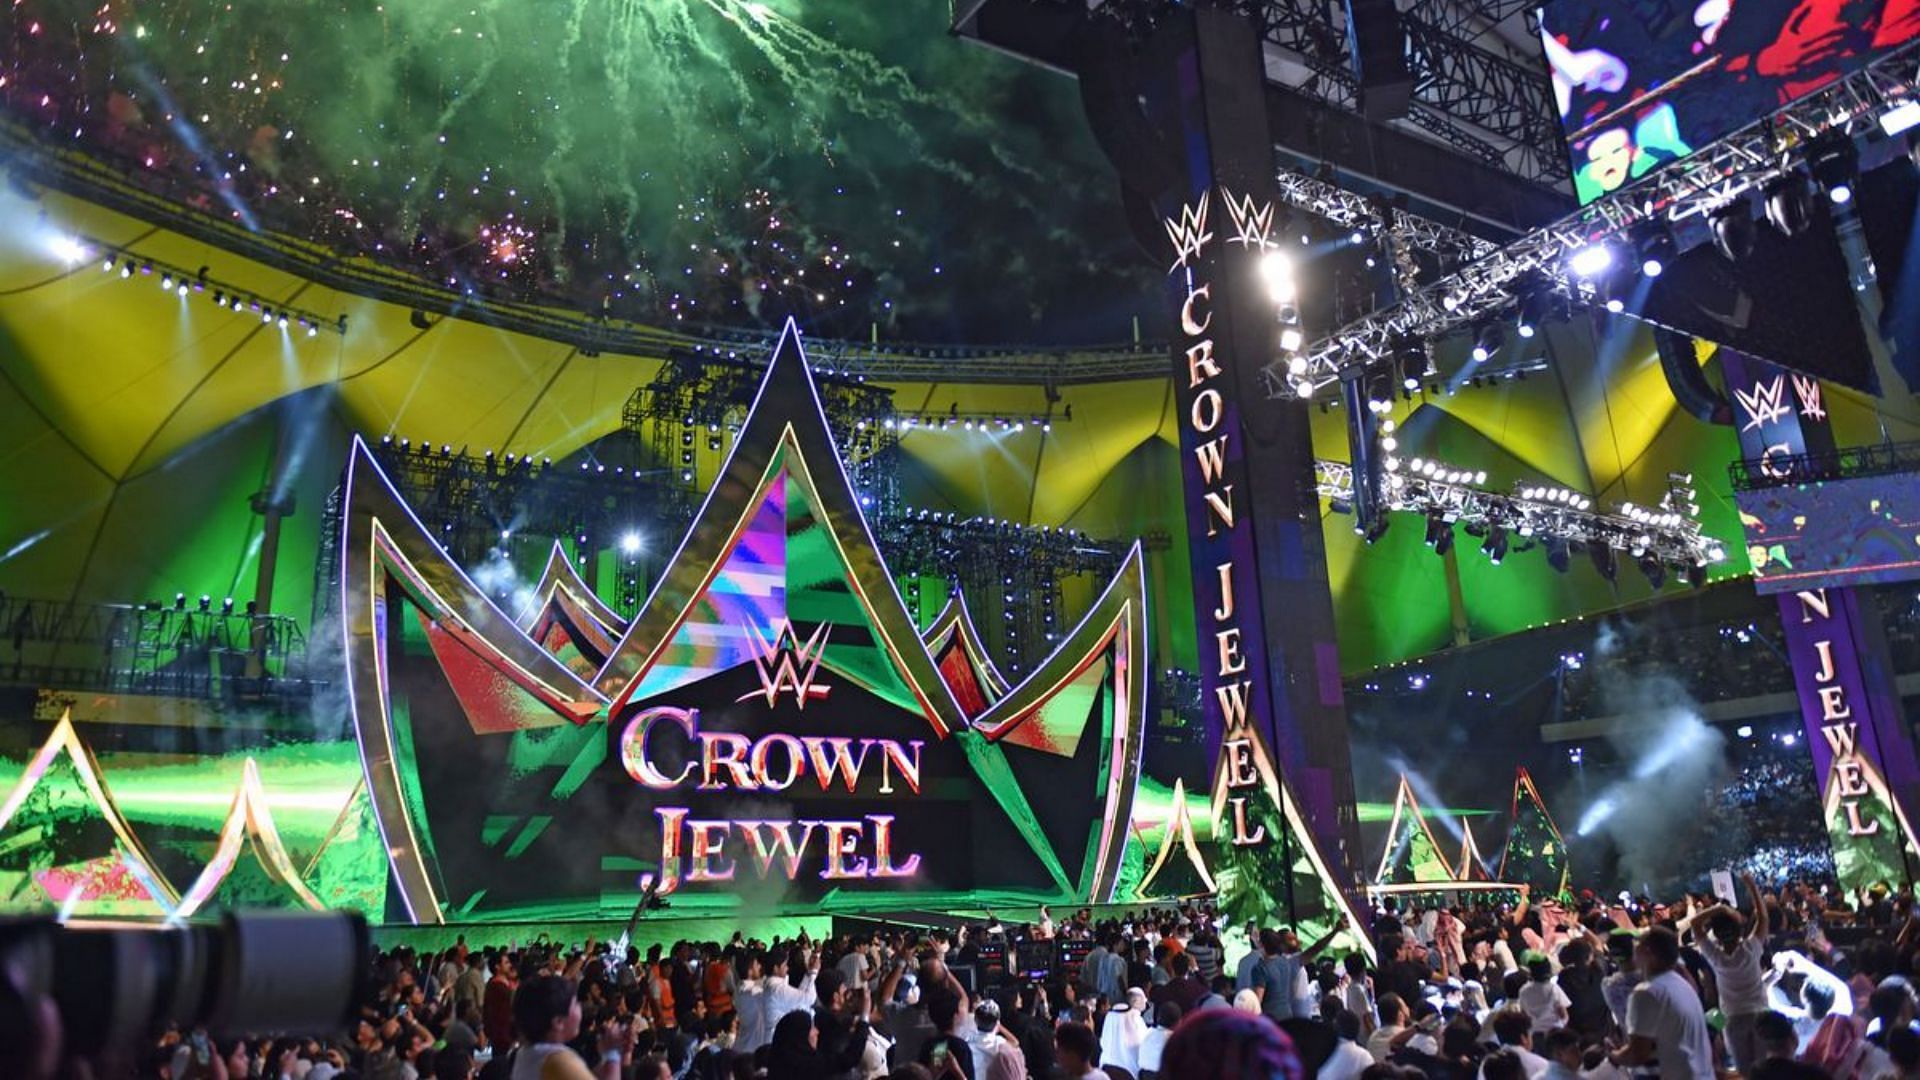 Who is going to show up at Crown Jewel?